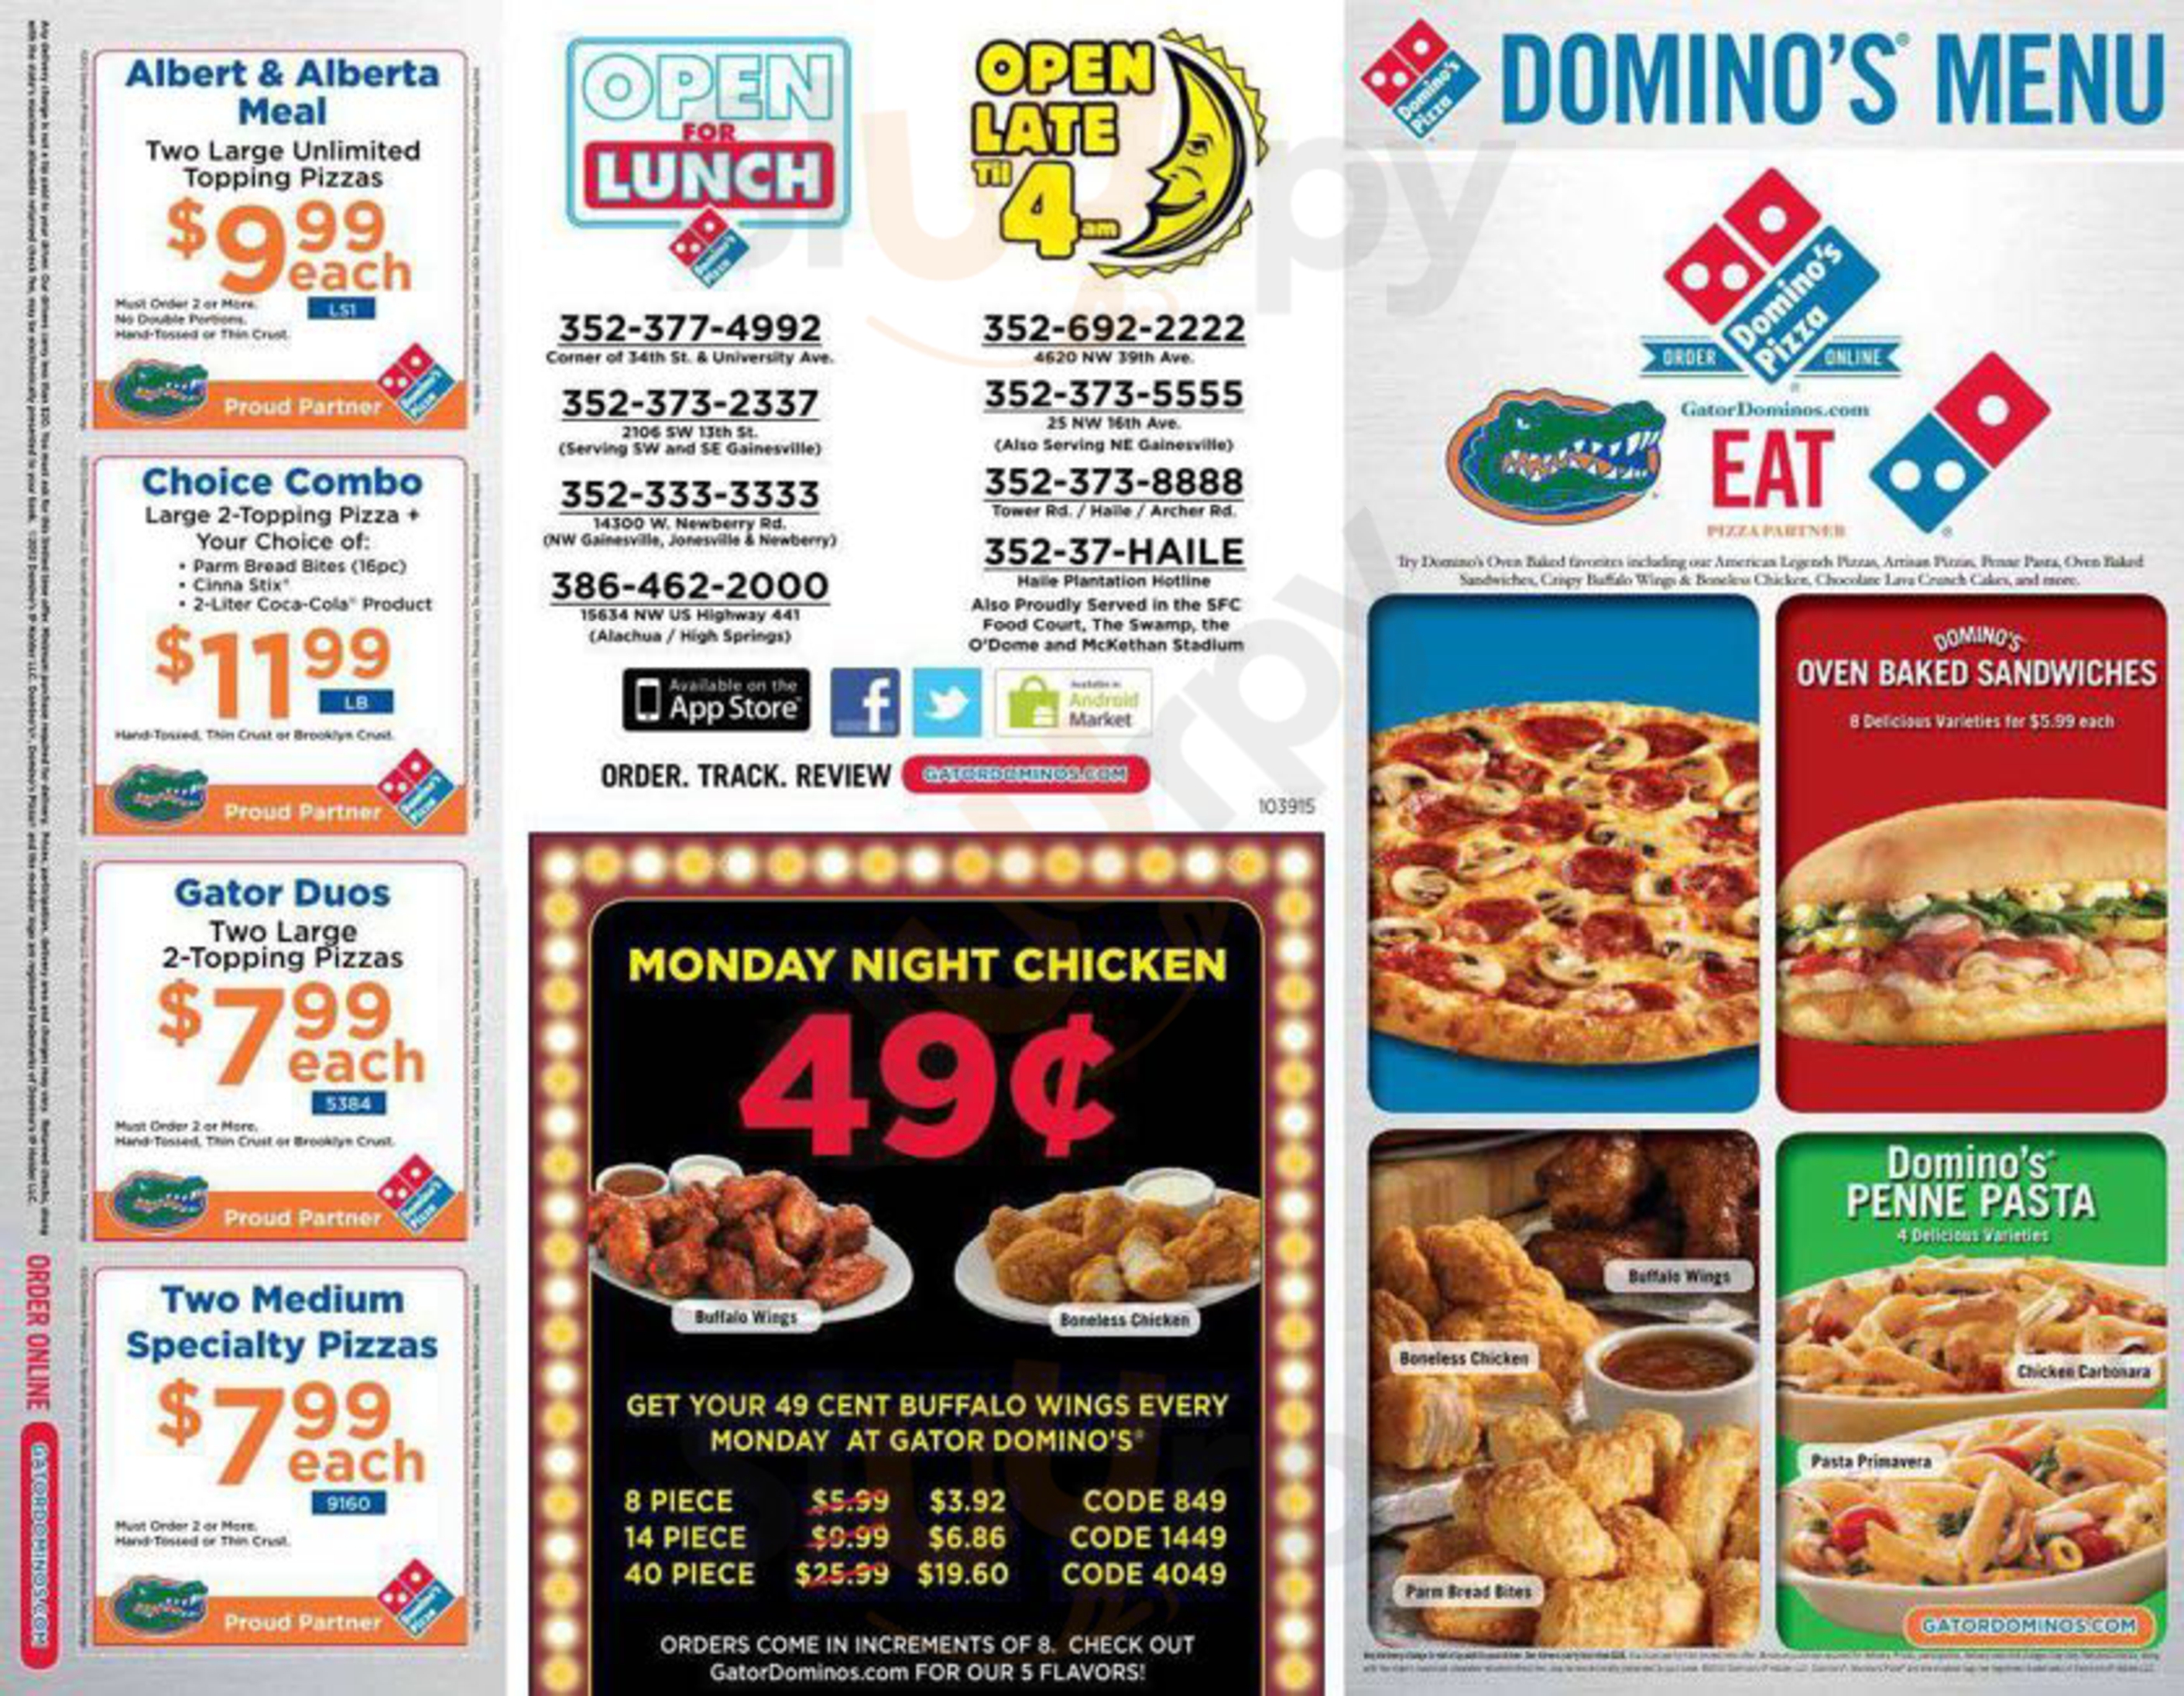 Domino's Pizza Knoxville Menu - 1